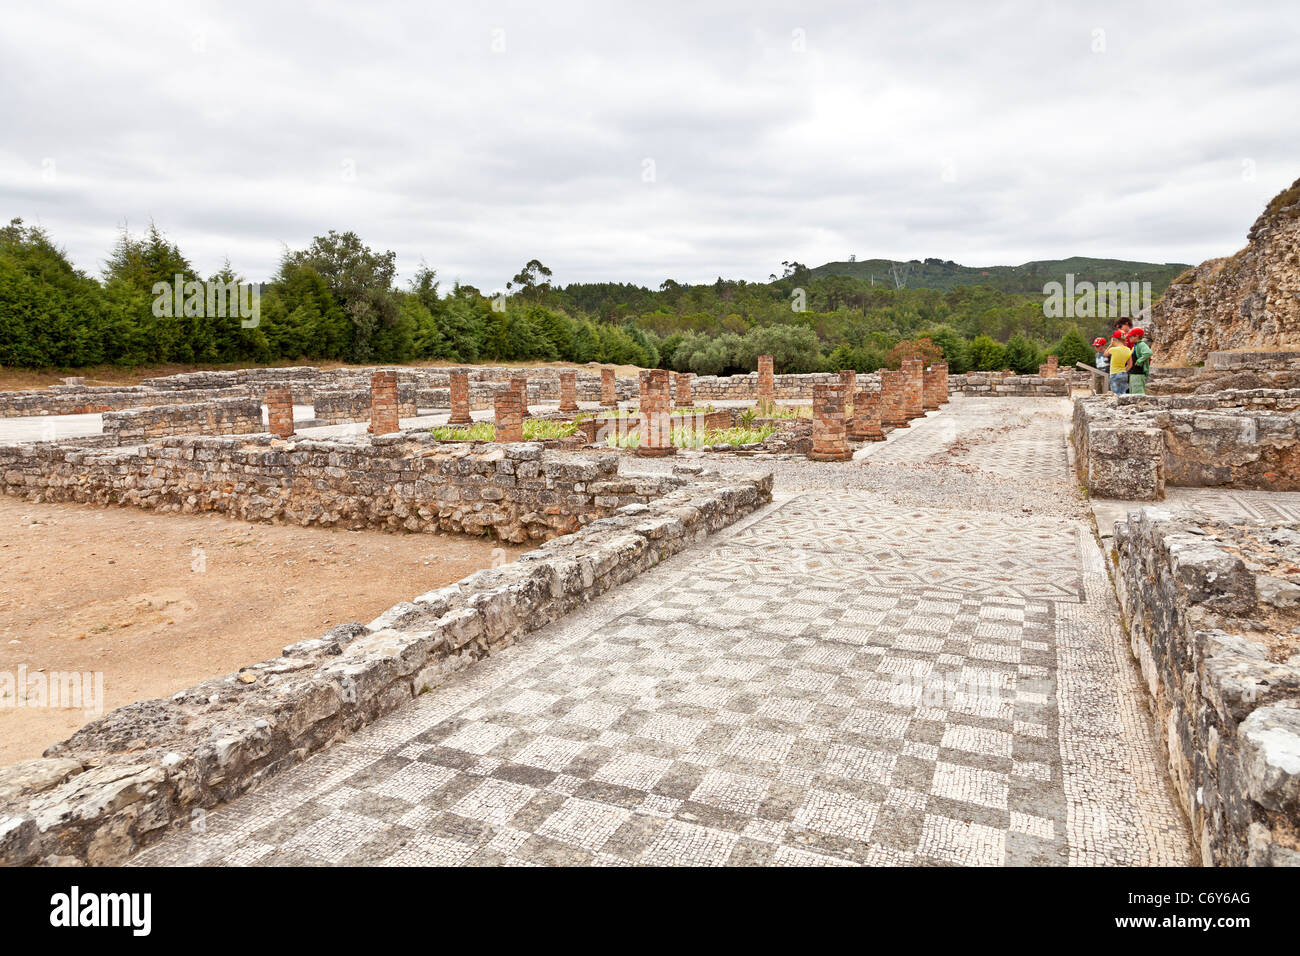 Peristyle and Swastika Mosaic in the House of the Swastika Villa in Conimbriga, the best preserved Roman city ruins in Portugal. Stock Photo